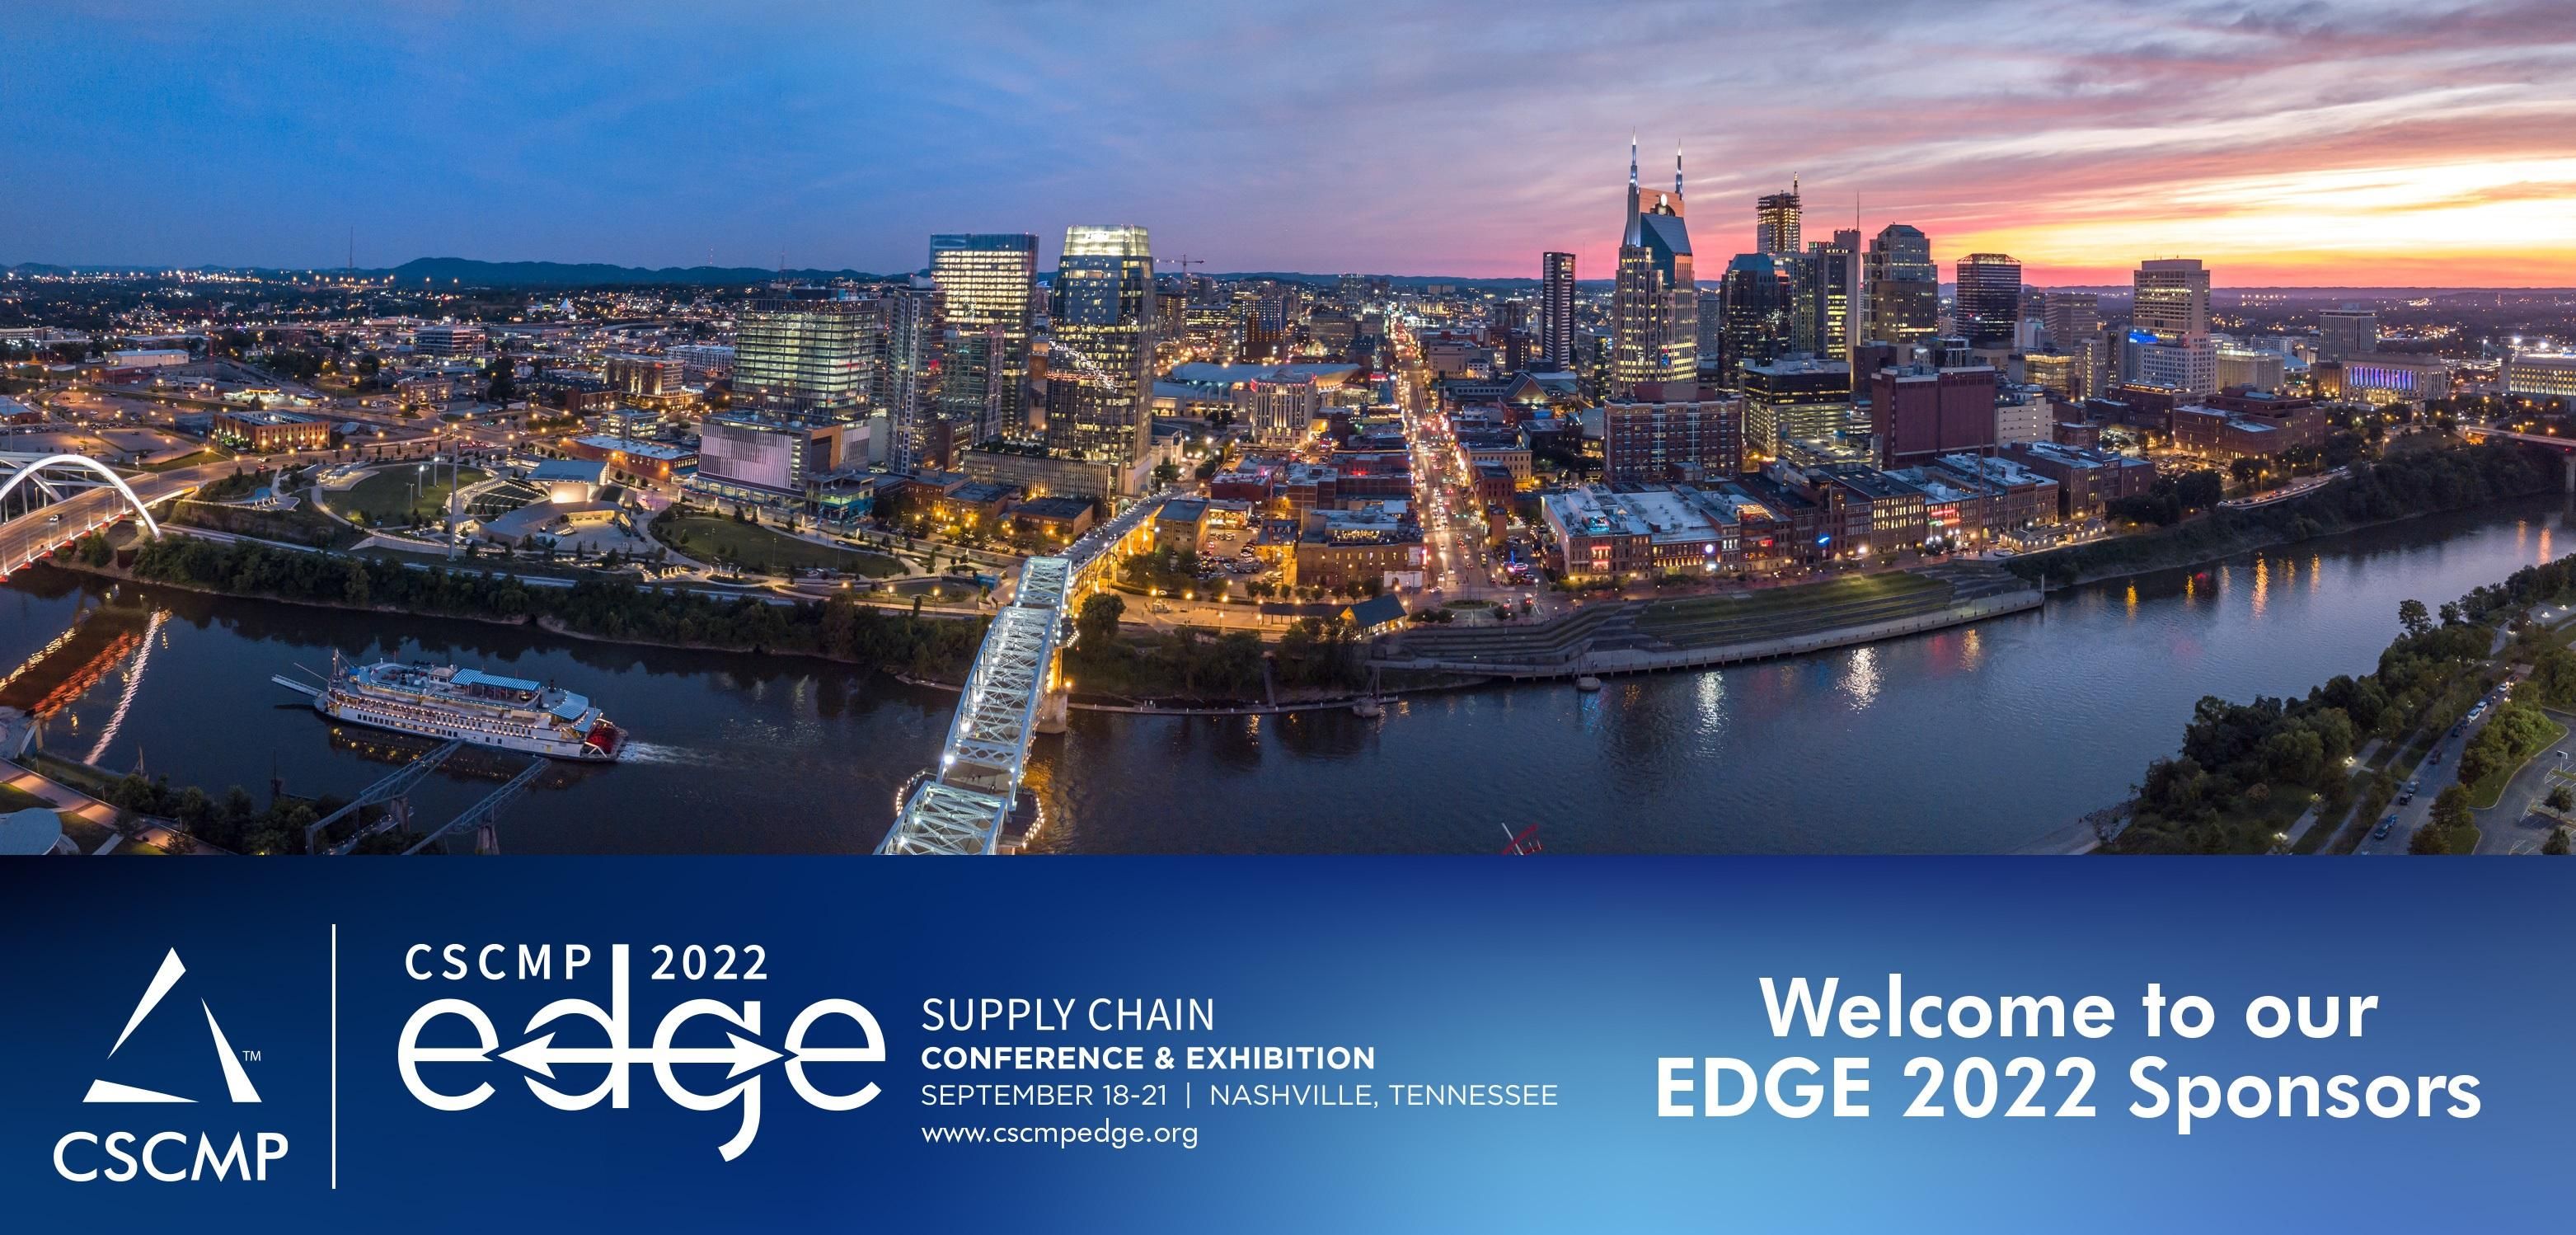 The Council of Supply Chain Management Professionals (CSCMP) annual EDGE conference takes place soon and Penske Logistics will have a major presence there. The company will serve as an exhibitor, top event sponsor, and feature three company officers offering their knowledge at educational sessions.